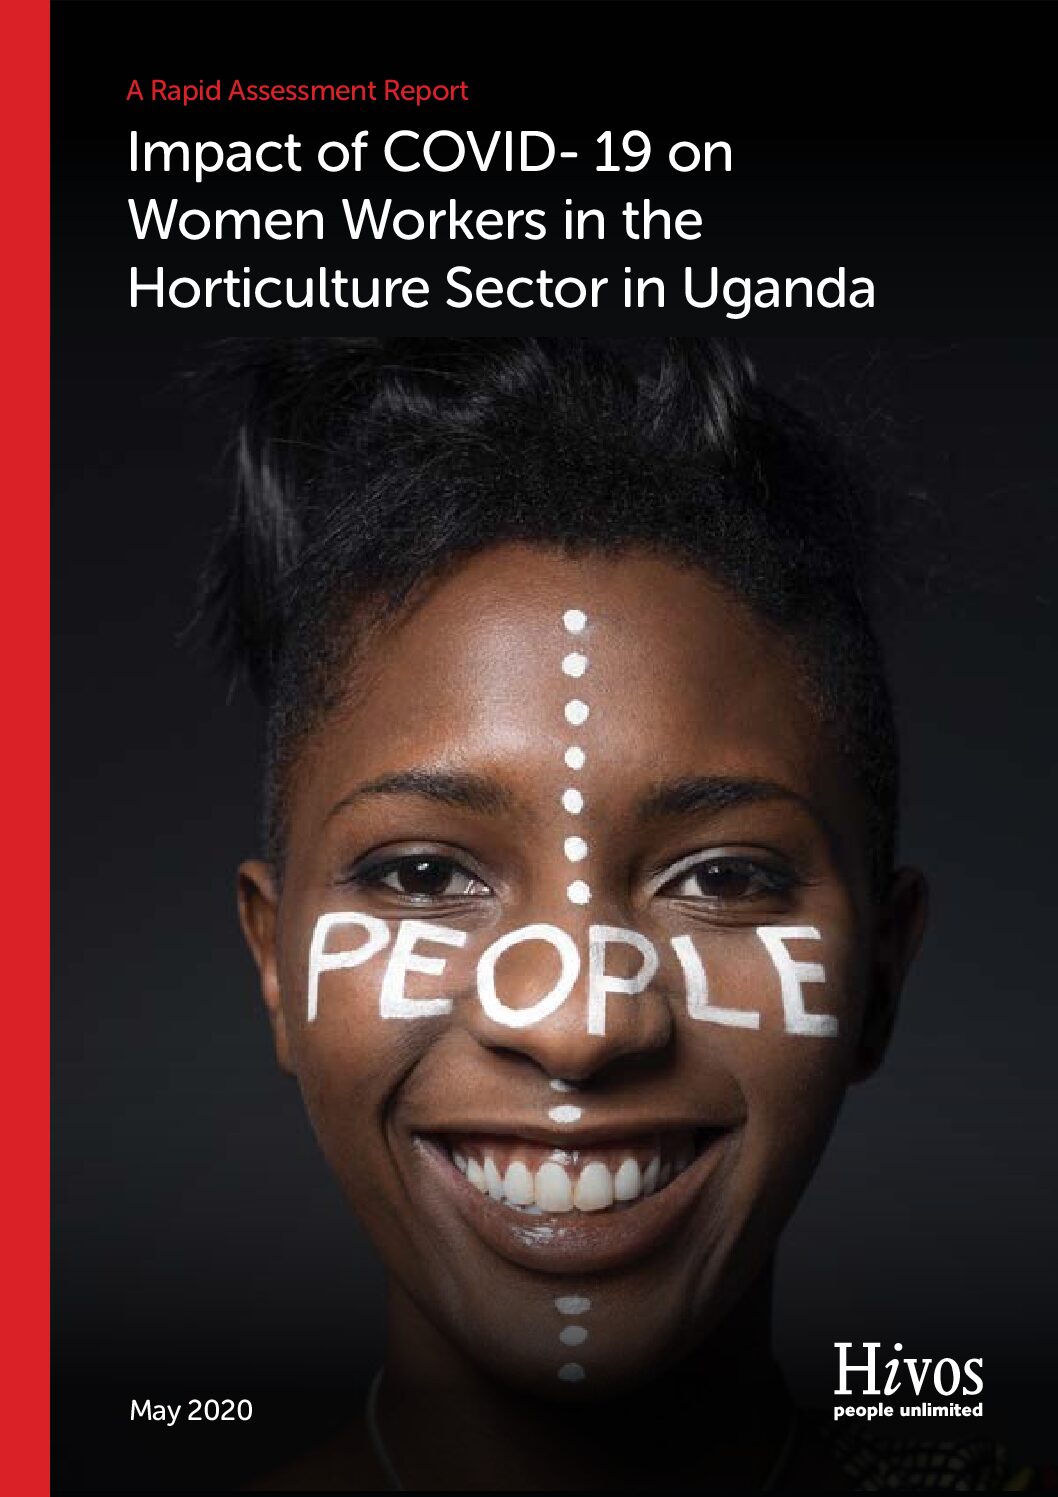 Impact of COVID-19 on Women Workers in the Horticulture Sector in Uganda